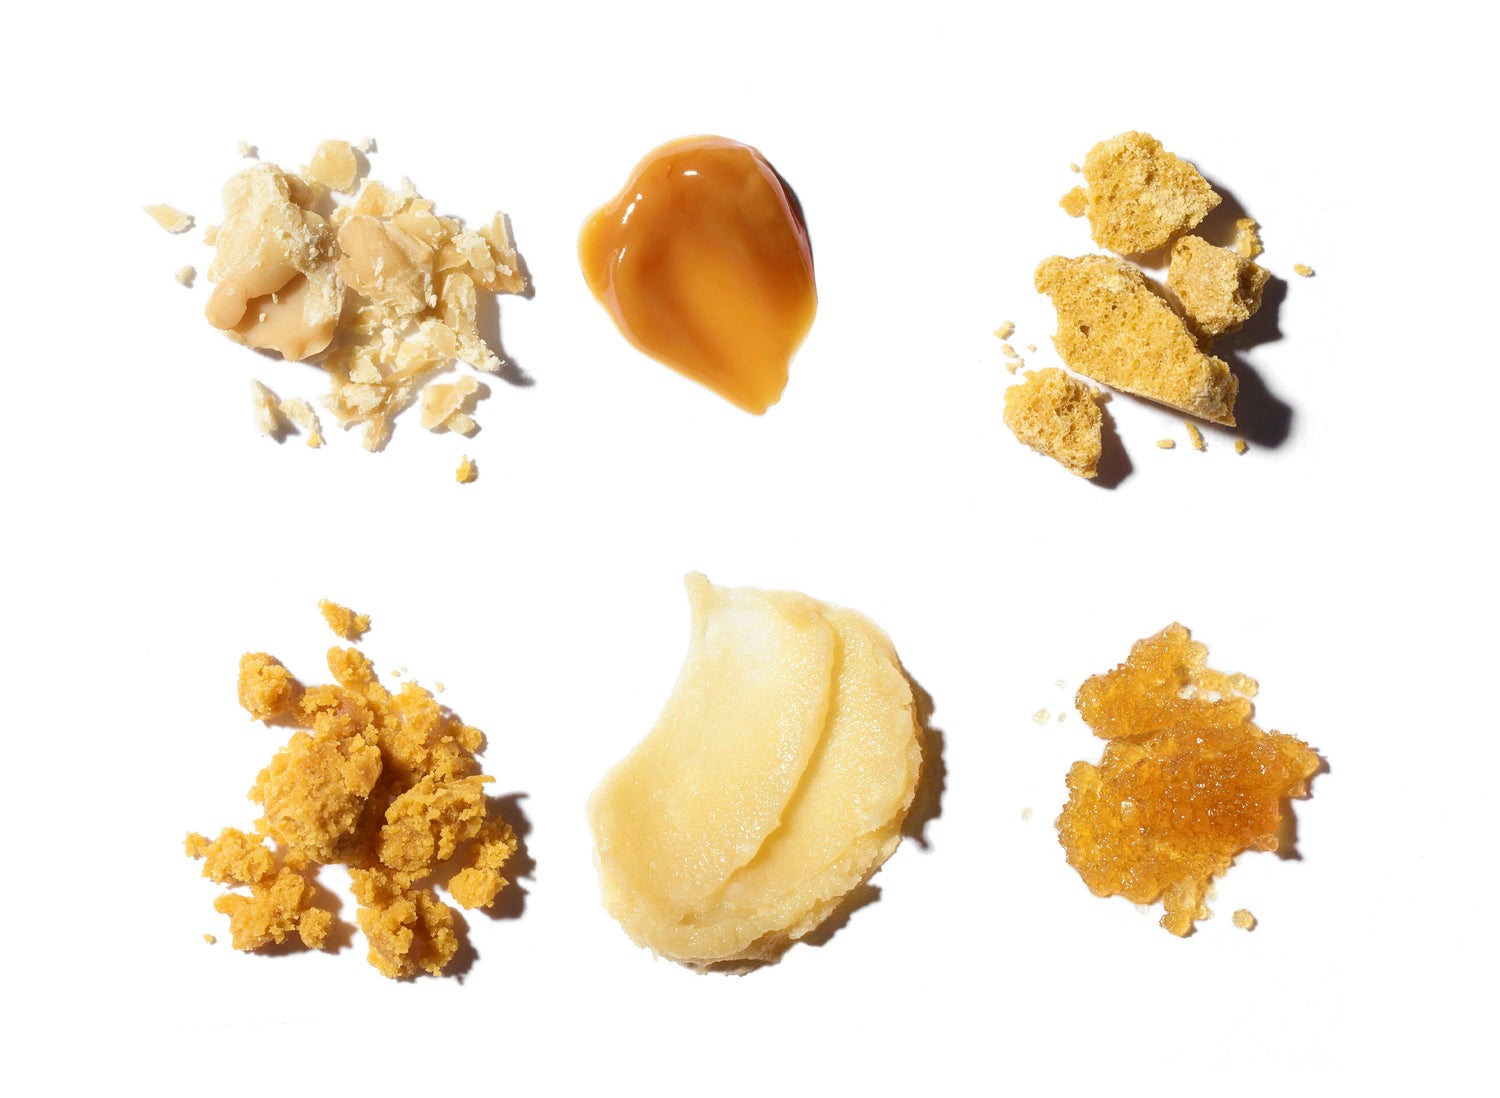 Wax 101: What Are Wax Concentrates & How Do You Use Them?